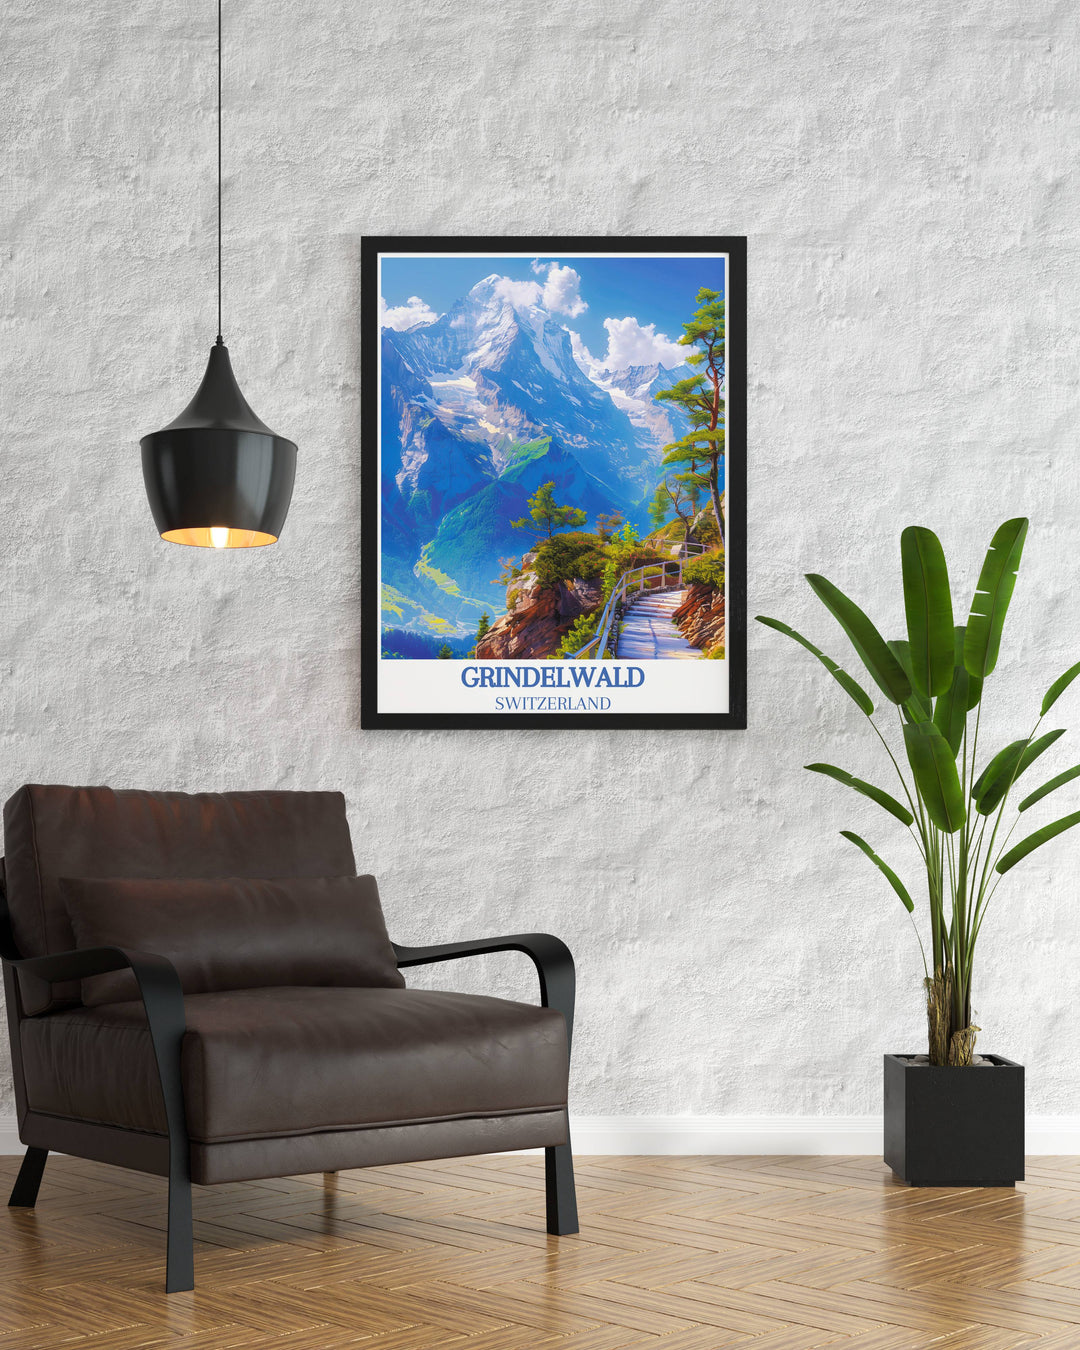 Hikers on the First Cliff Walk with Eiger in the background during summer, captured in a vibrant Swiss Alps print.